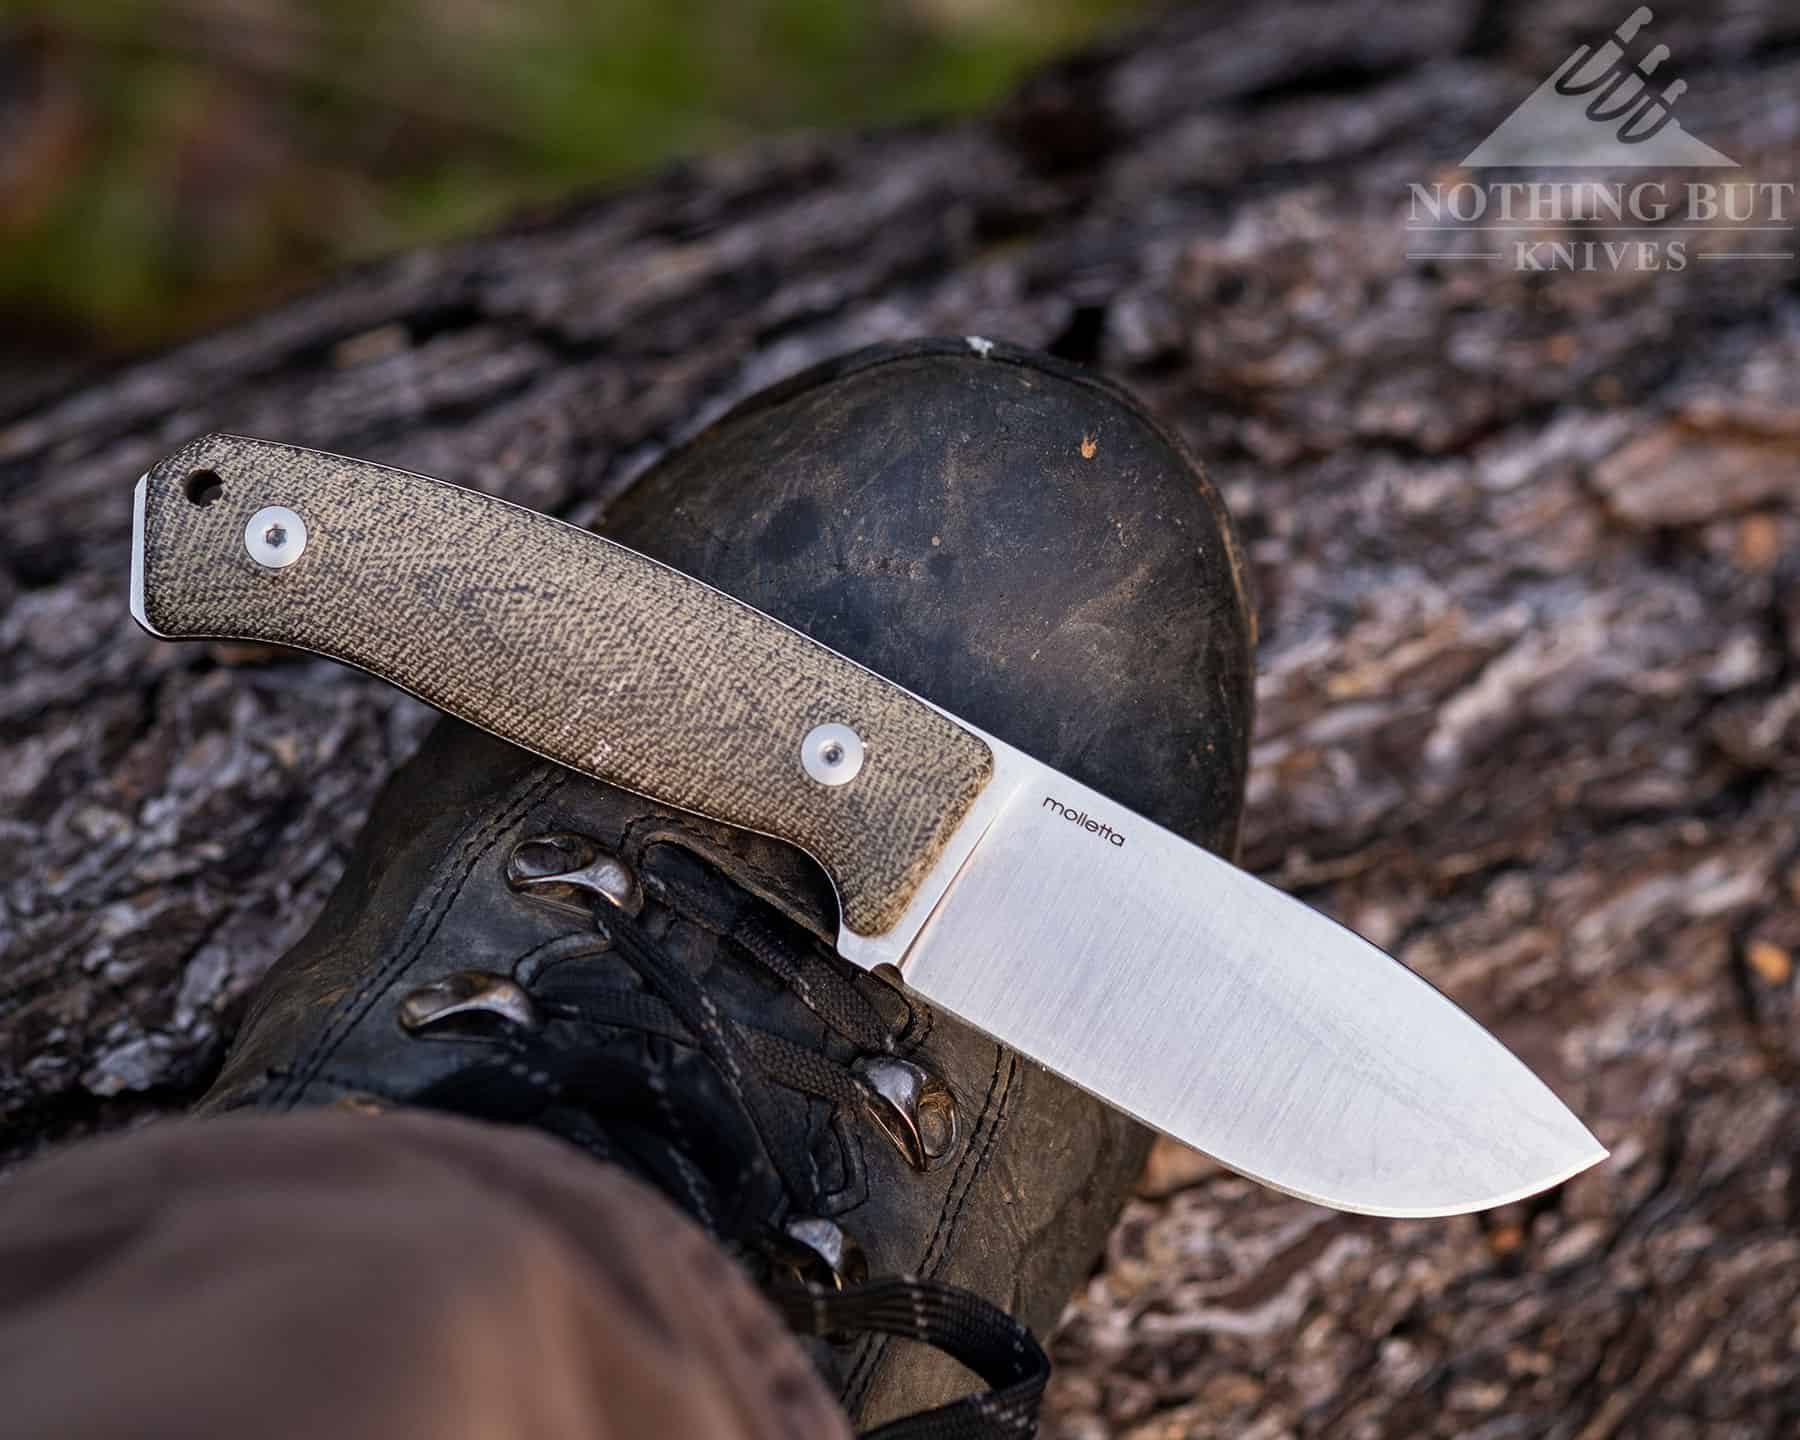 The M2M may be the fixed-blade knife to measure all fixed-blade knives against